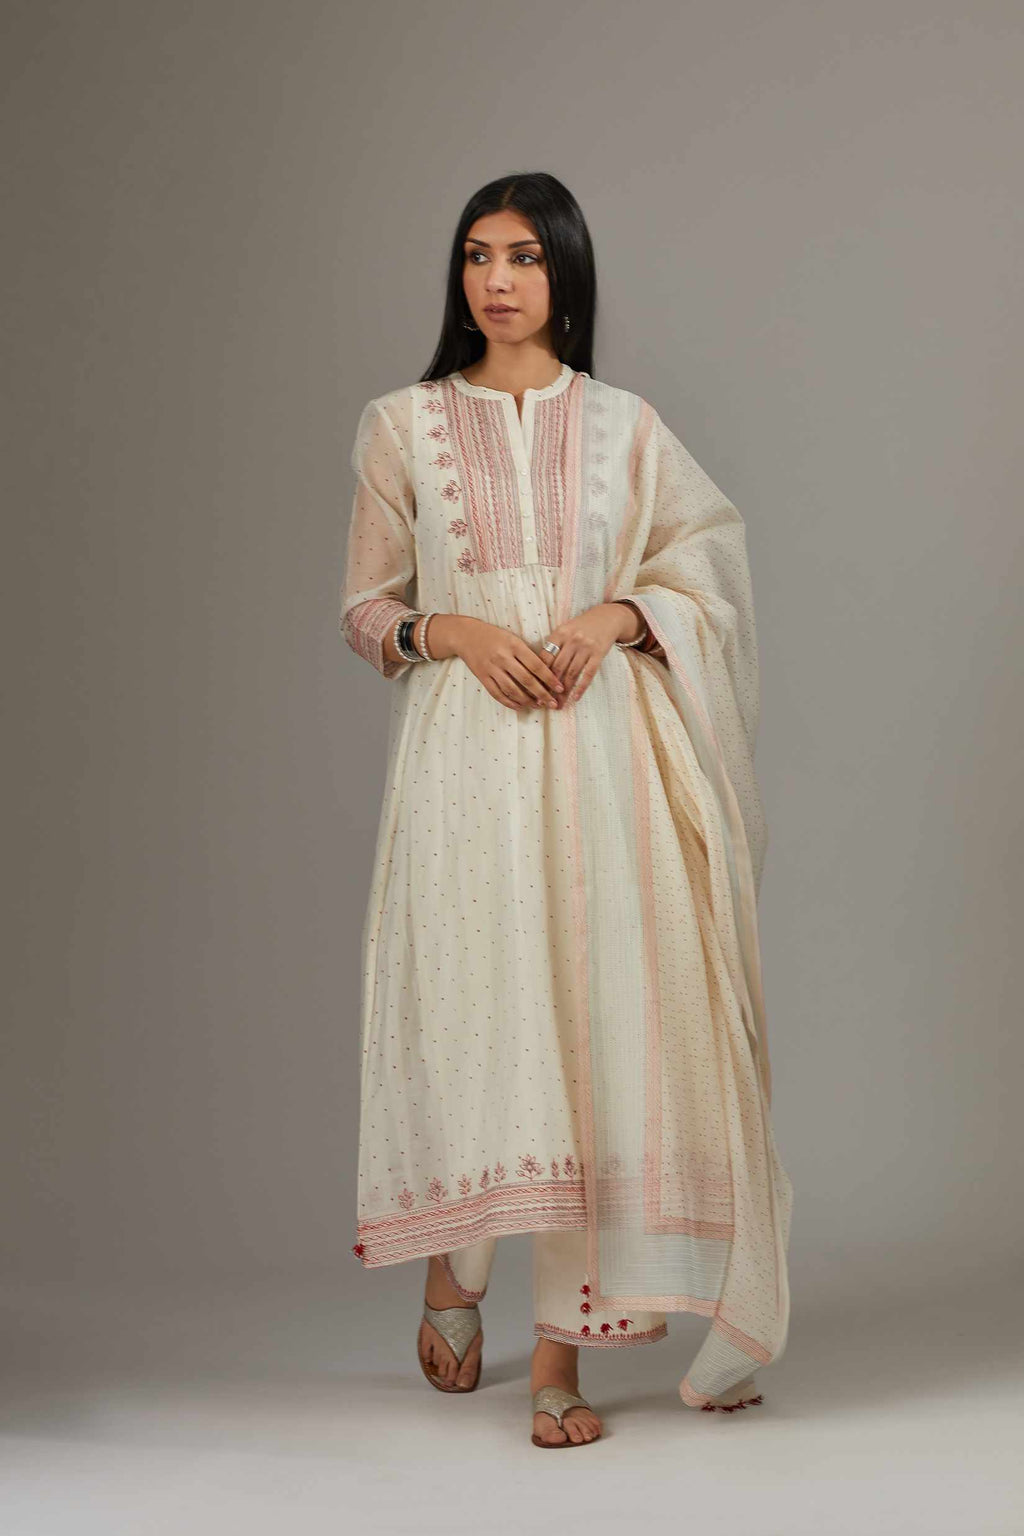 Hand block printed kurta dress set with quilted, embroidered yoke with fine gathers